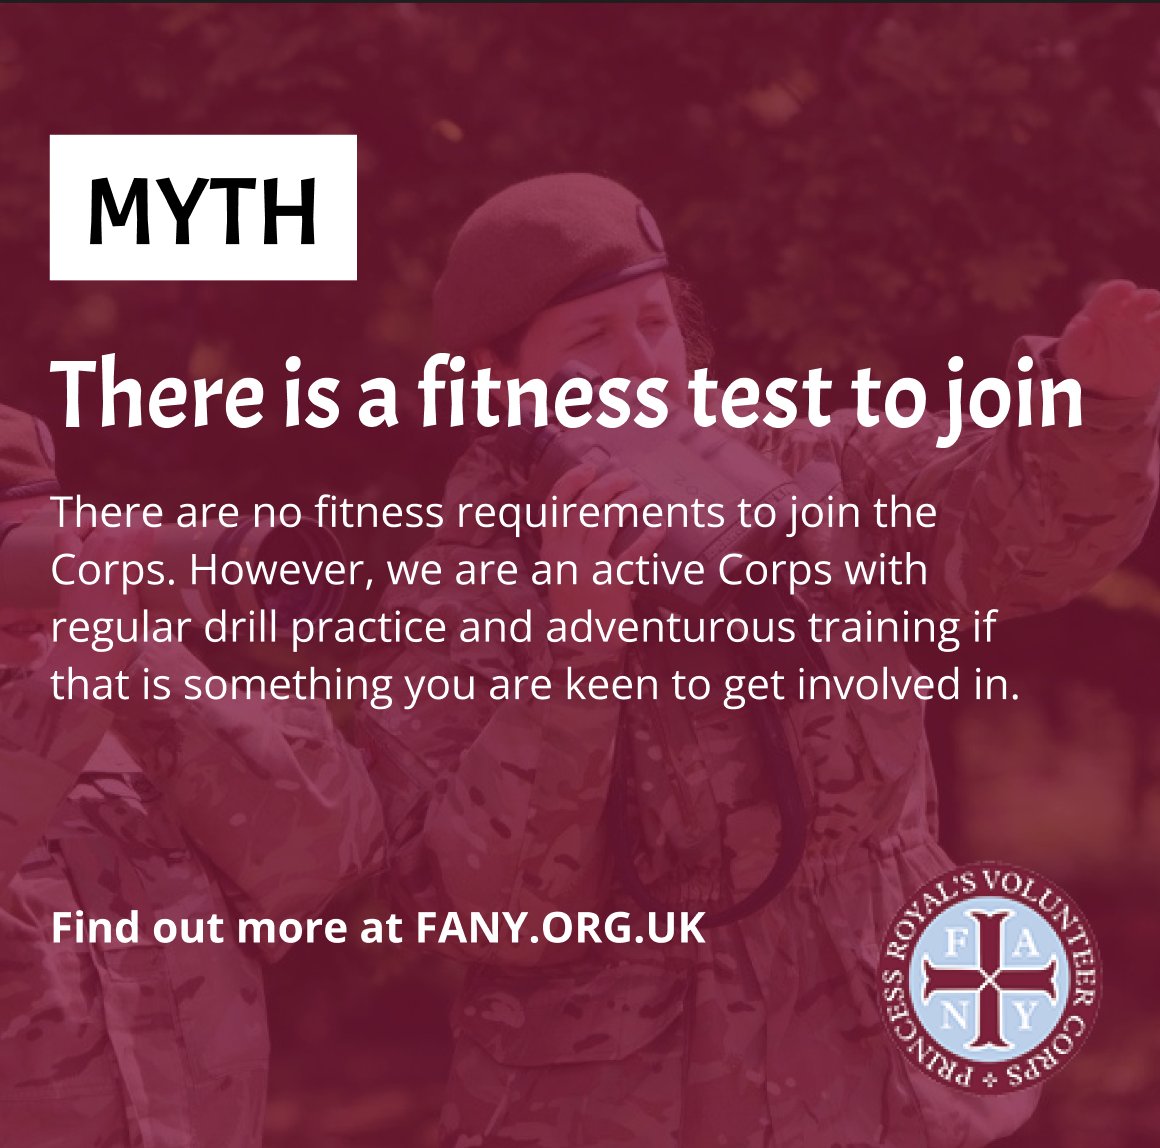 Here's another #myth about the Corps - fitness tests. There are no fitness requirements to join. However, we are an active Corps with regular drill practice and adventurous training if that is something you are keen on. fany.org.uk/Join-us #Mythbusting #JoinUs #Volunteer